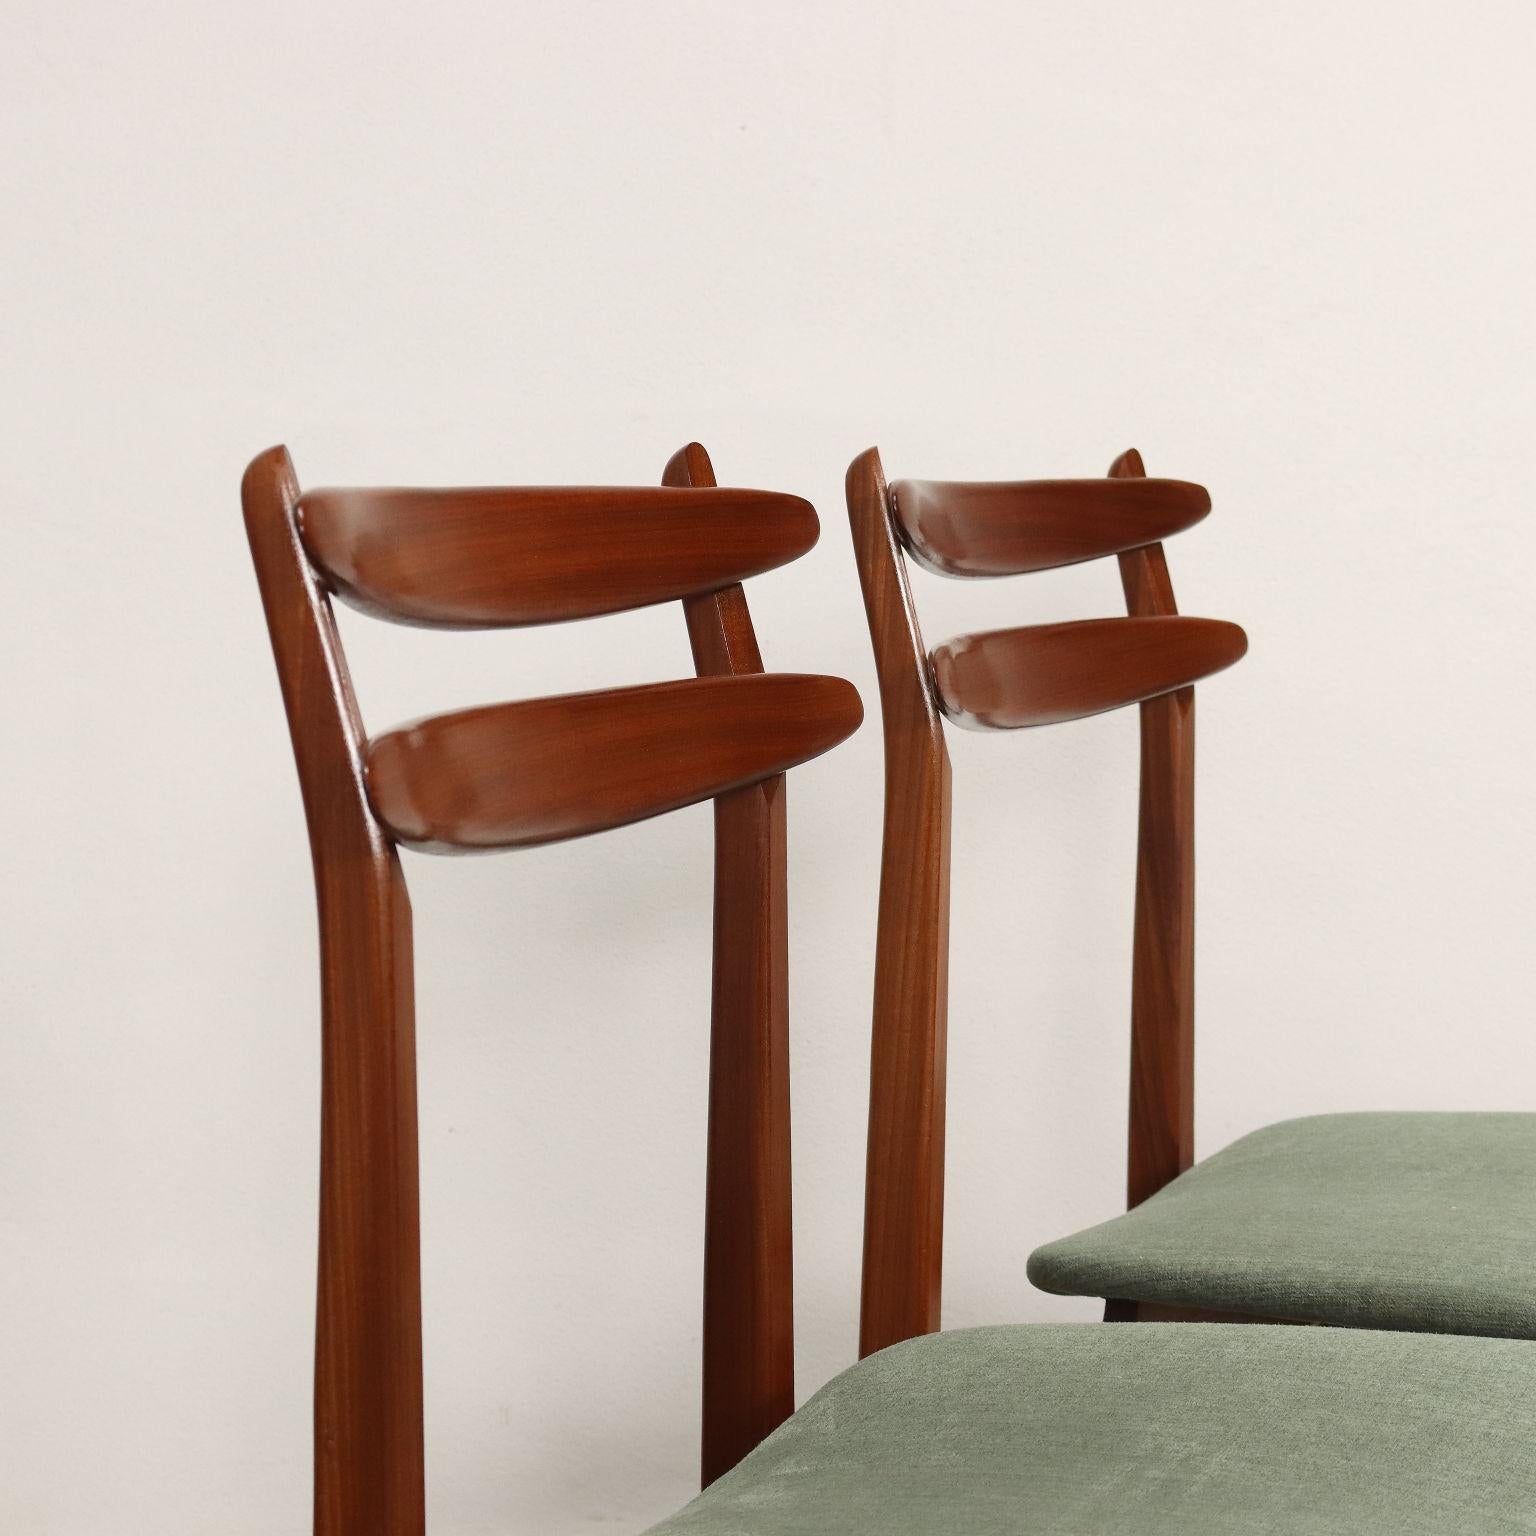 Mid-Century Modern Group of 4 Wooden Chairs Italy 1950s-1960s